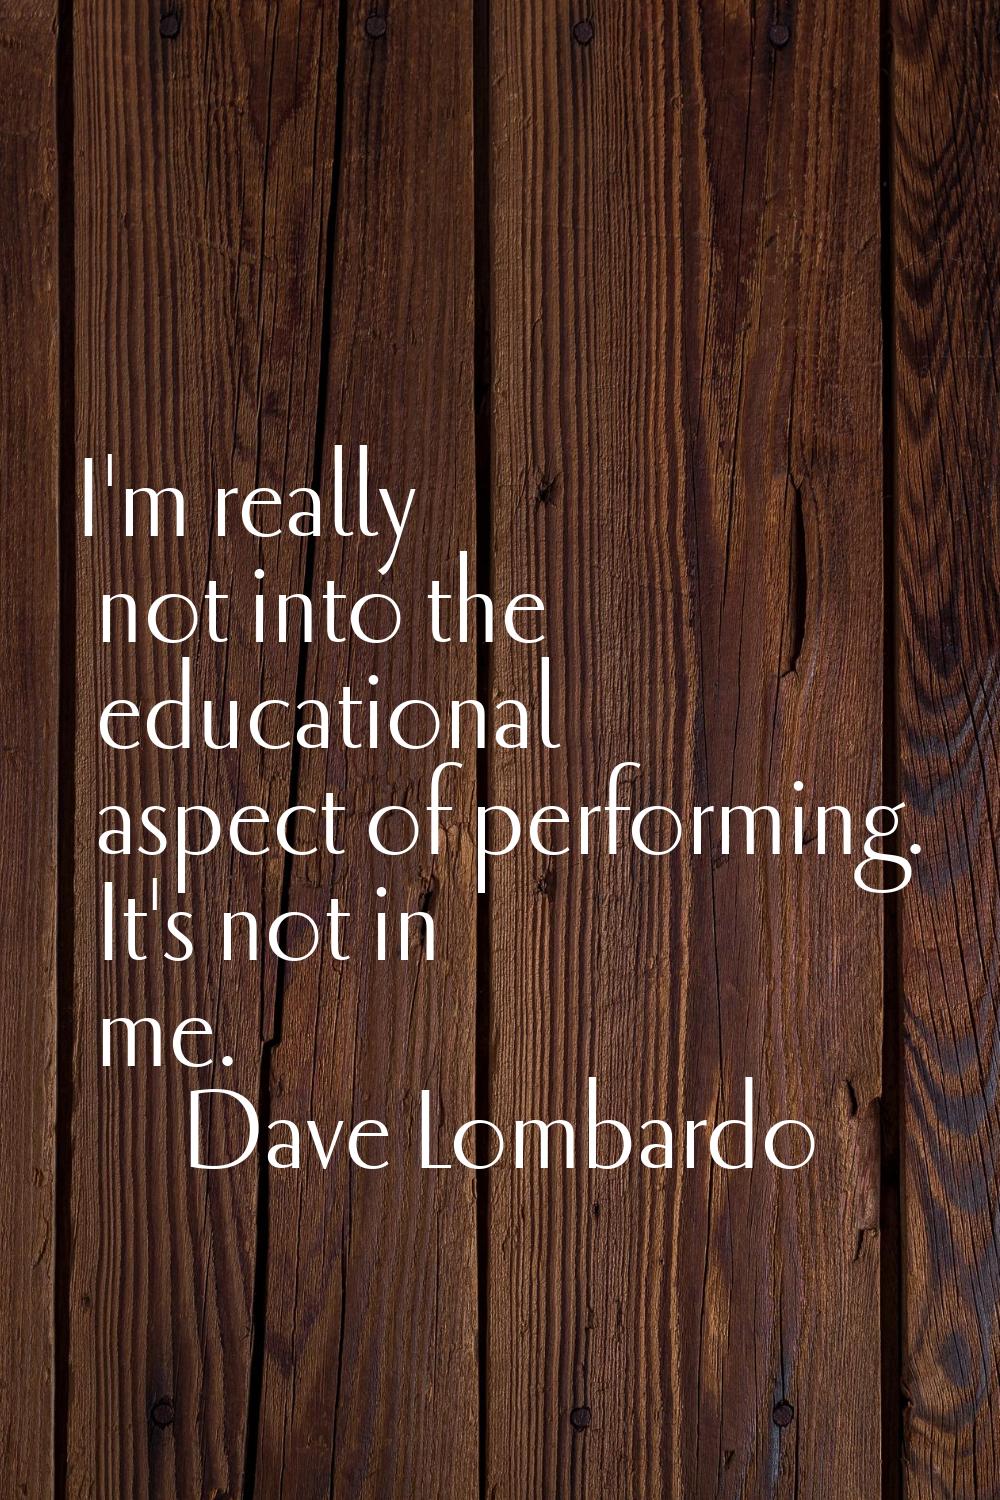 I'm really not into the educational aspect of performing. It's not in me.